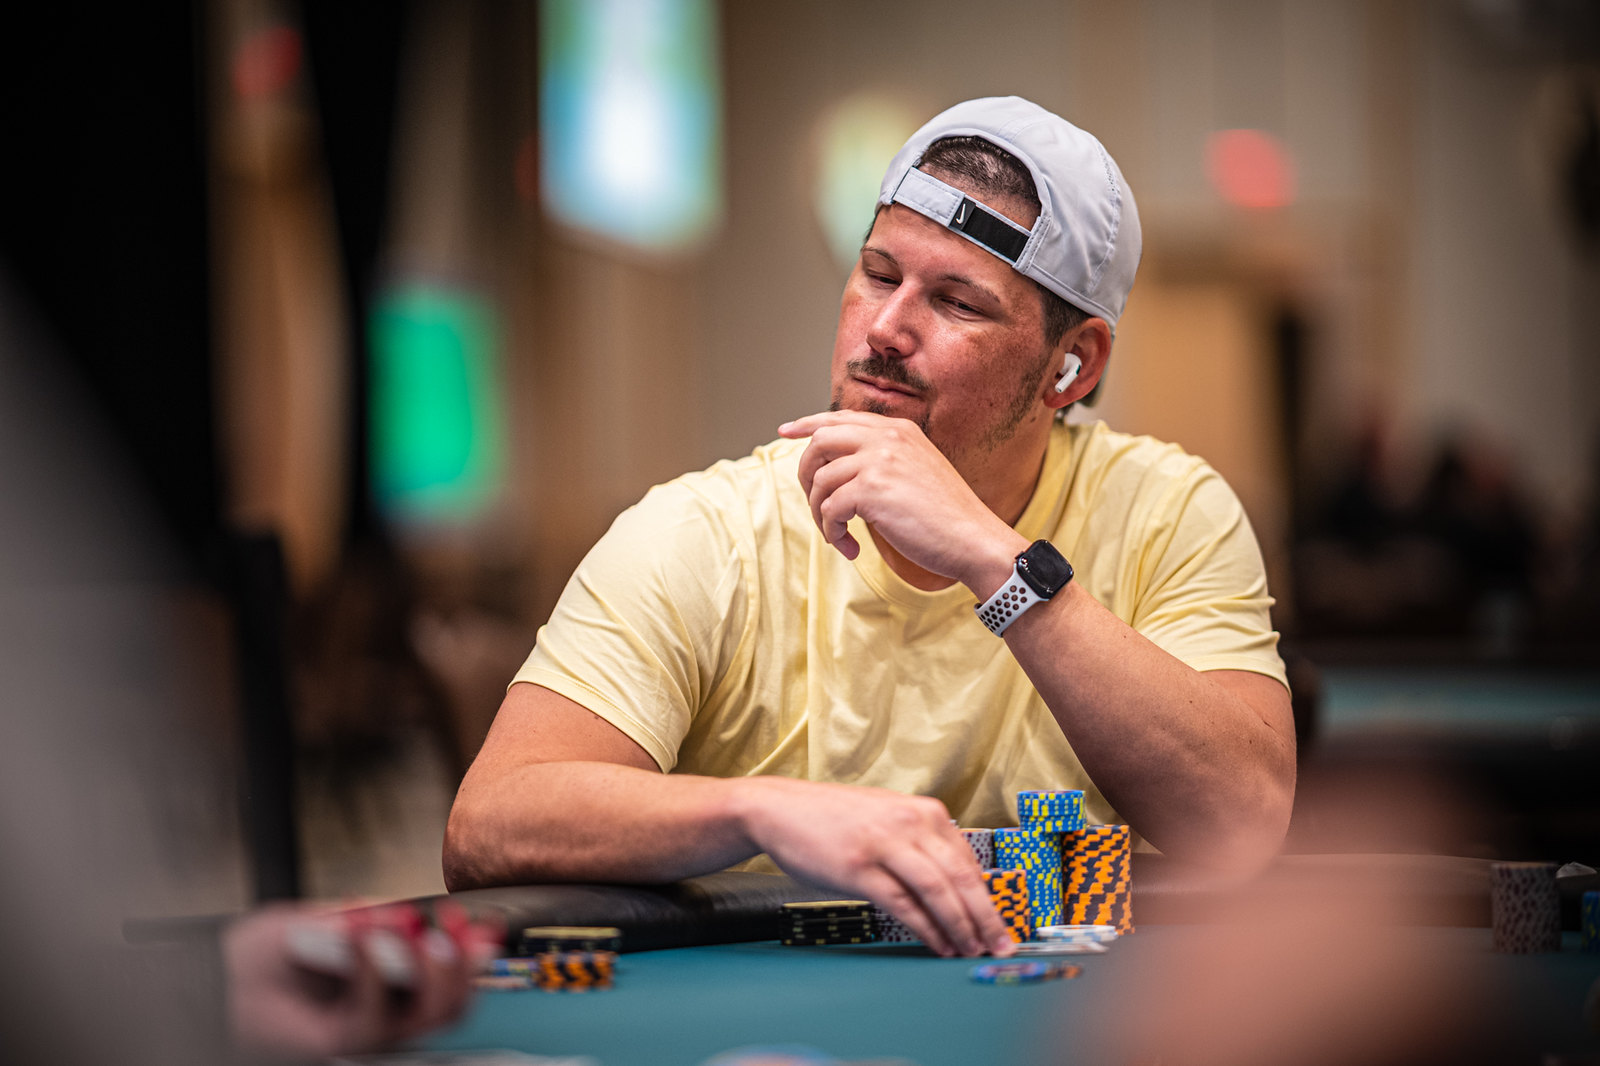 WPT Seminole Hard Rock Tampa Reaches the Sweet 16